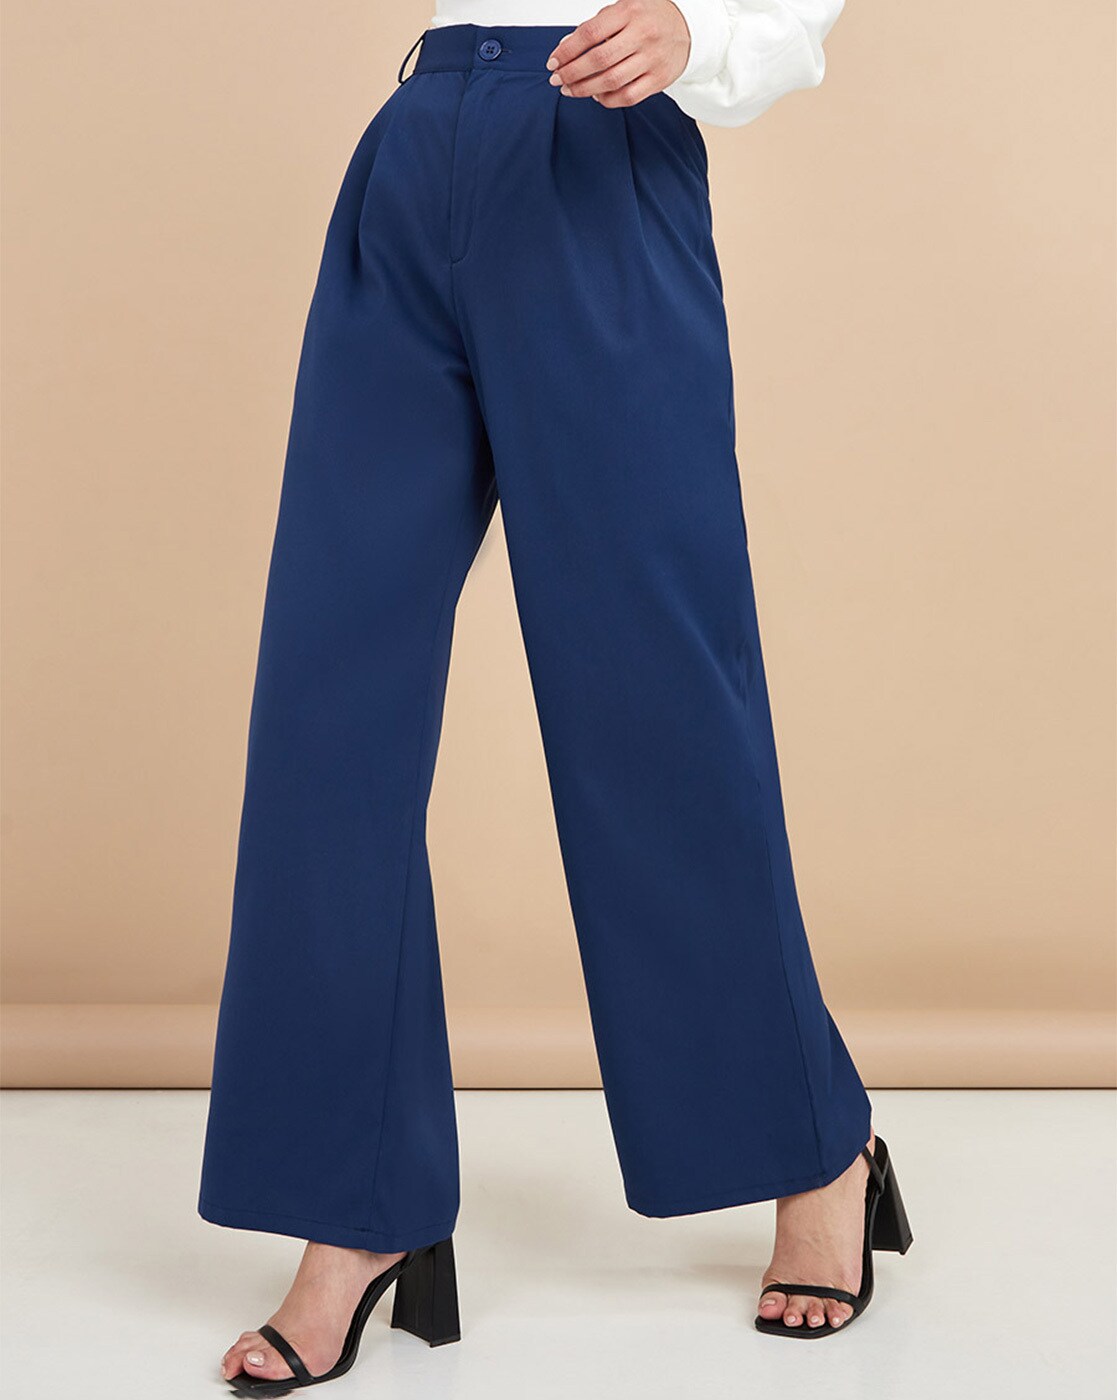 Wholesale Women High Waist Loose Wide Leg Long Trousers Female Casual Work  Wear Lady Office Pant From malibabacom